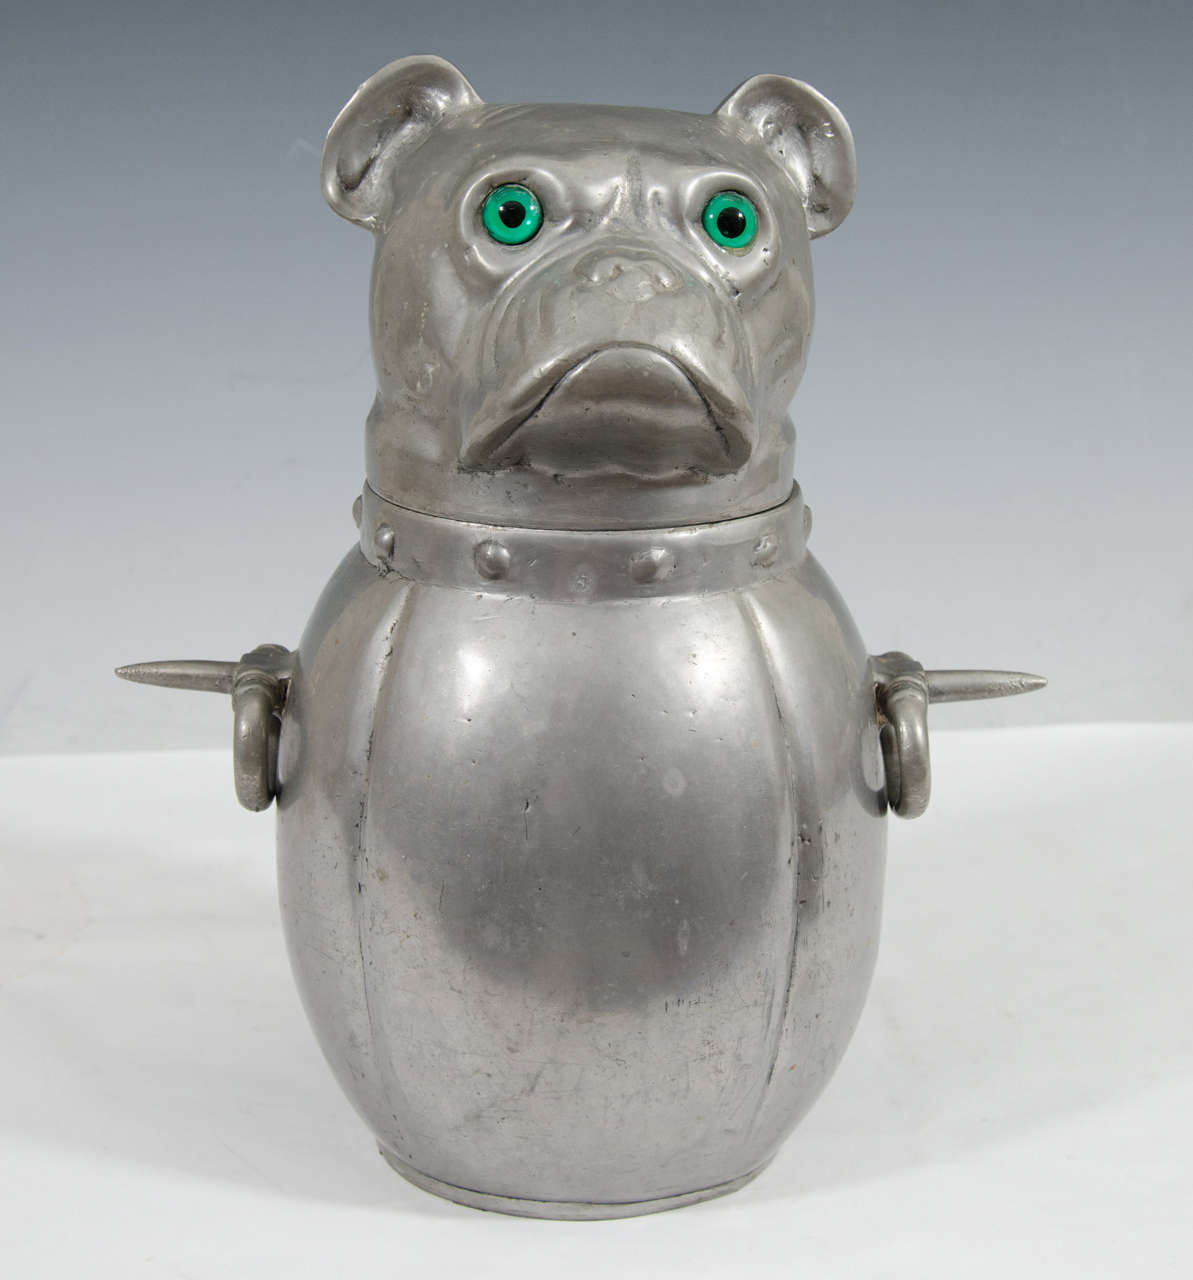 A French pewter ice bucket in the shape of bulldog with bright Green Glass Eyes.A great Bar Accessory for Dog Lovers.A Functional and Compelling piece for your Bar.